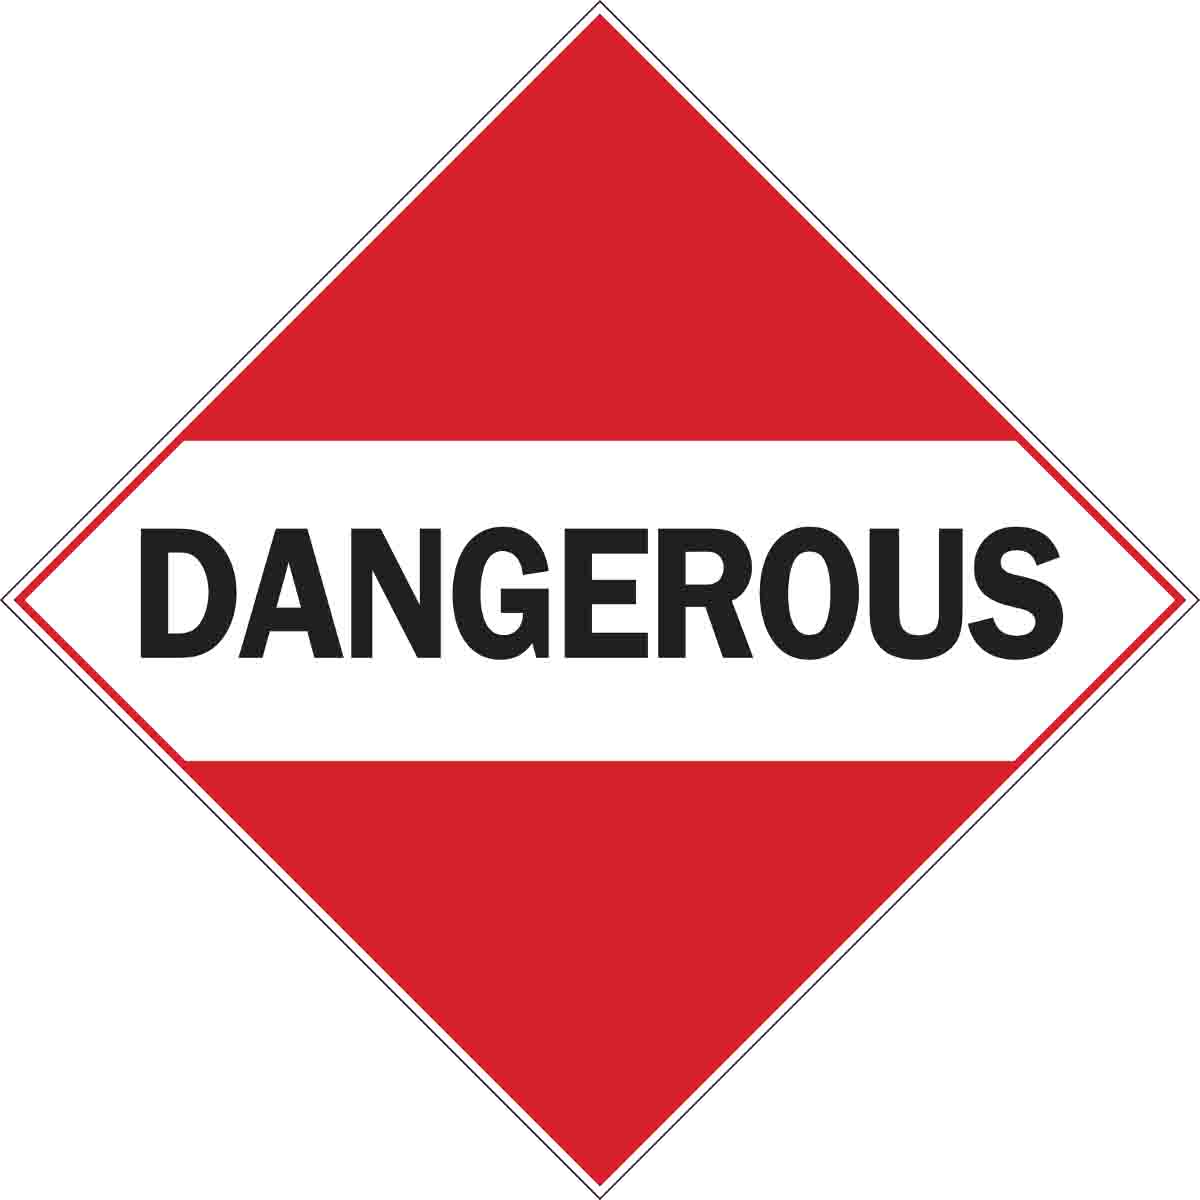 Details about  / NEW Brady 88191 Danger Warning Safety Sign 10/" x 7/"  *FREE SHIPPING*